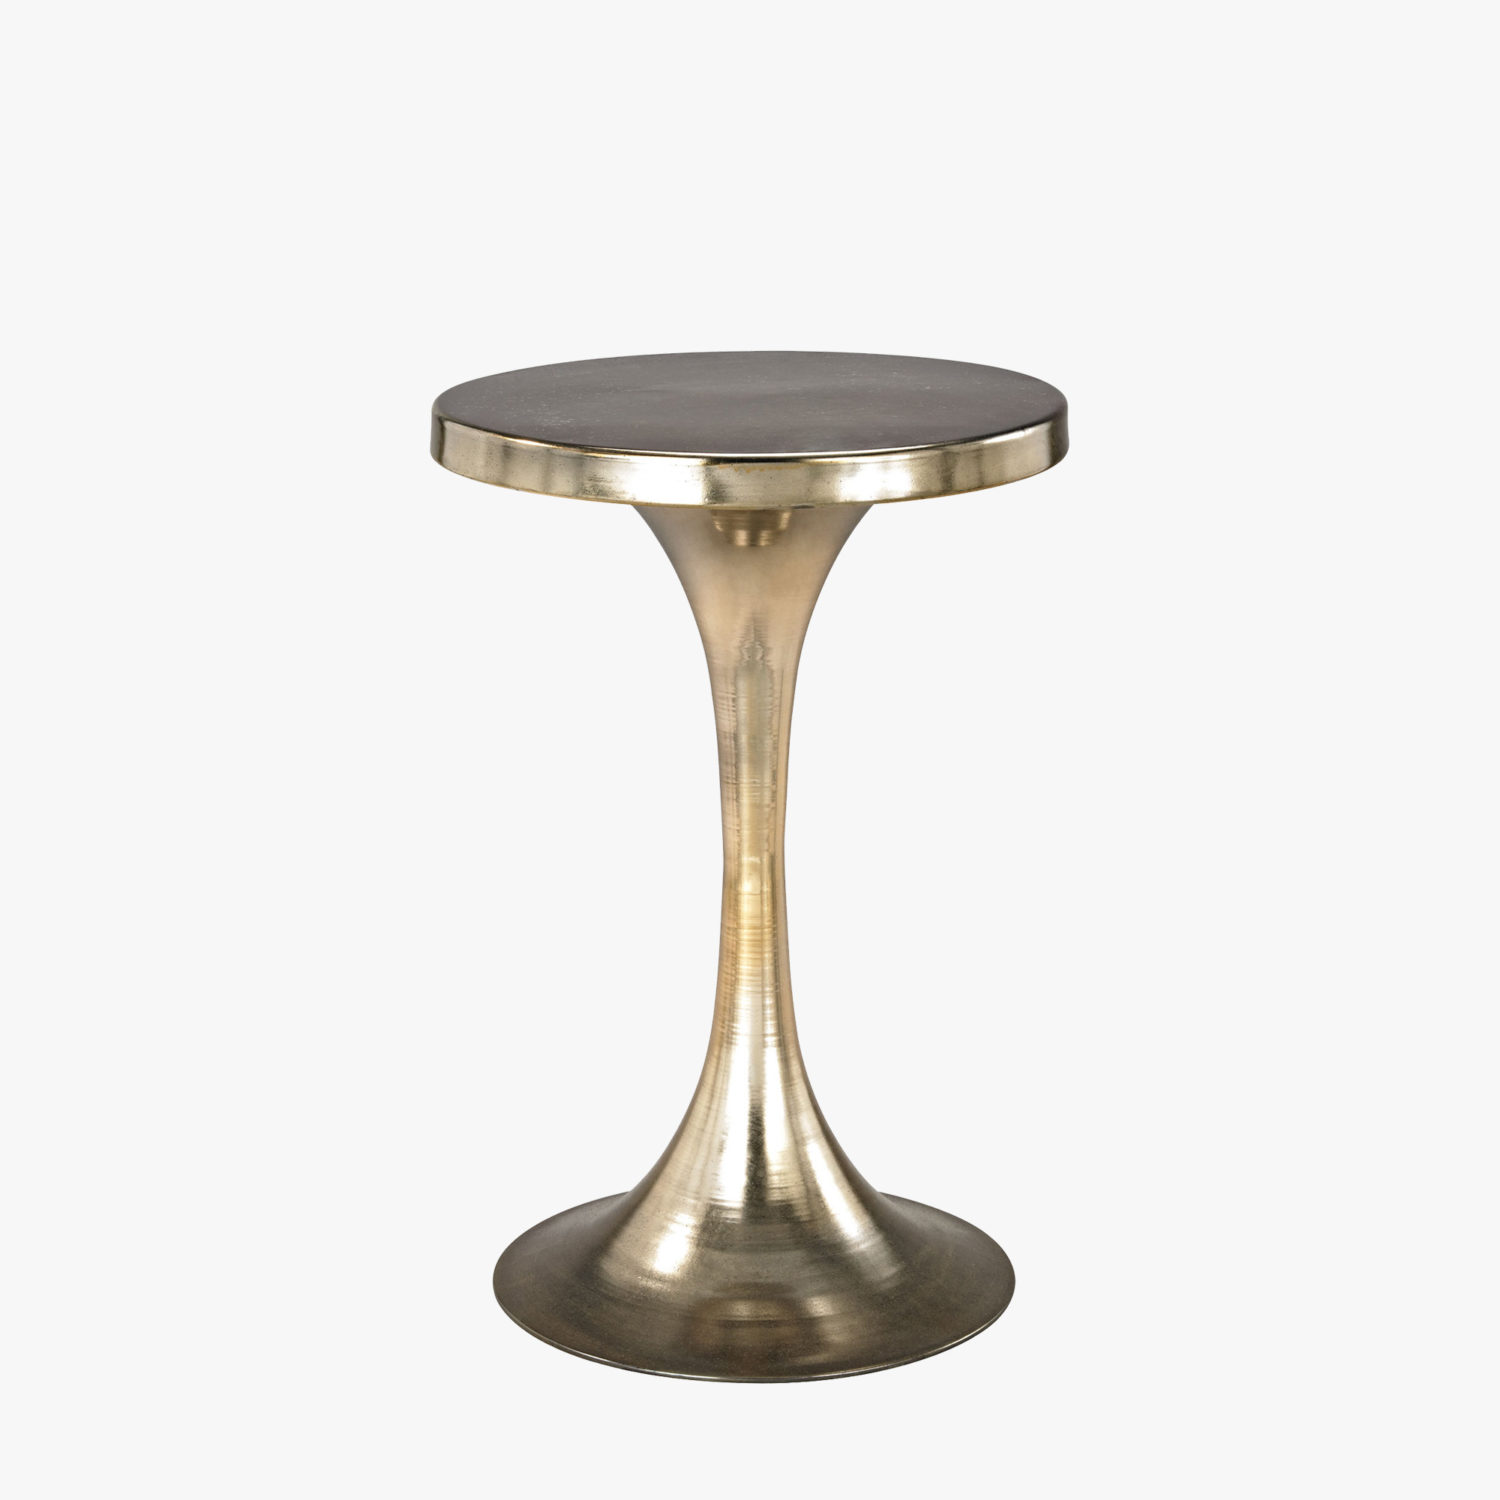 antique gold pedestal accent table tables dear keaton mirrored dining linens verizon tablet contemporary chairs childrens outdoor furniture weber grill side metal coffee legs